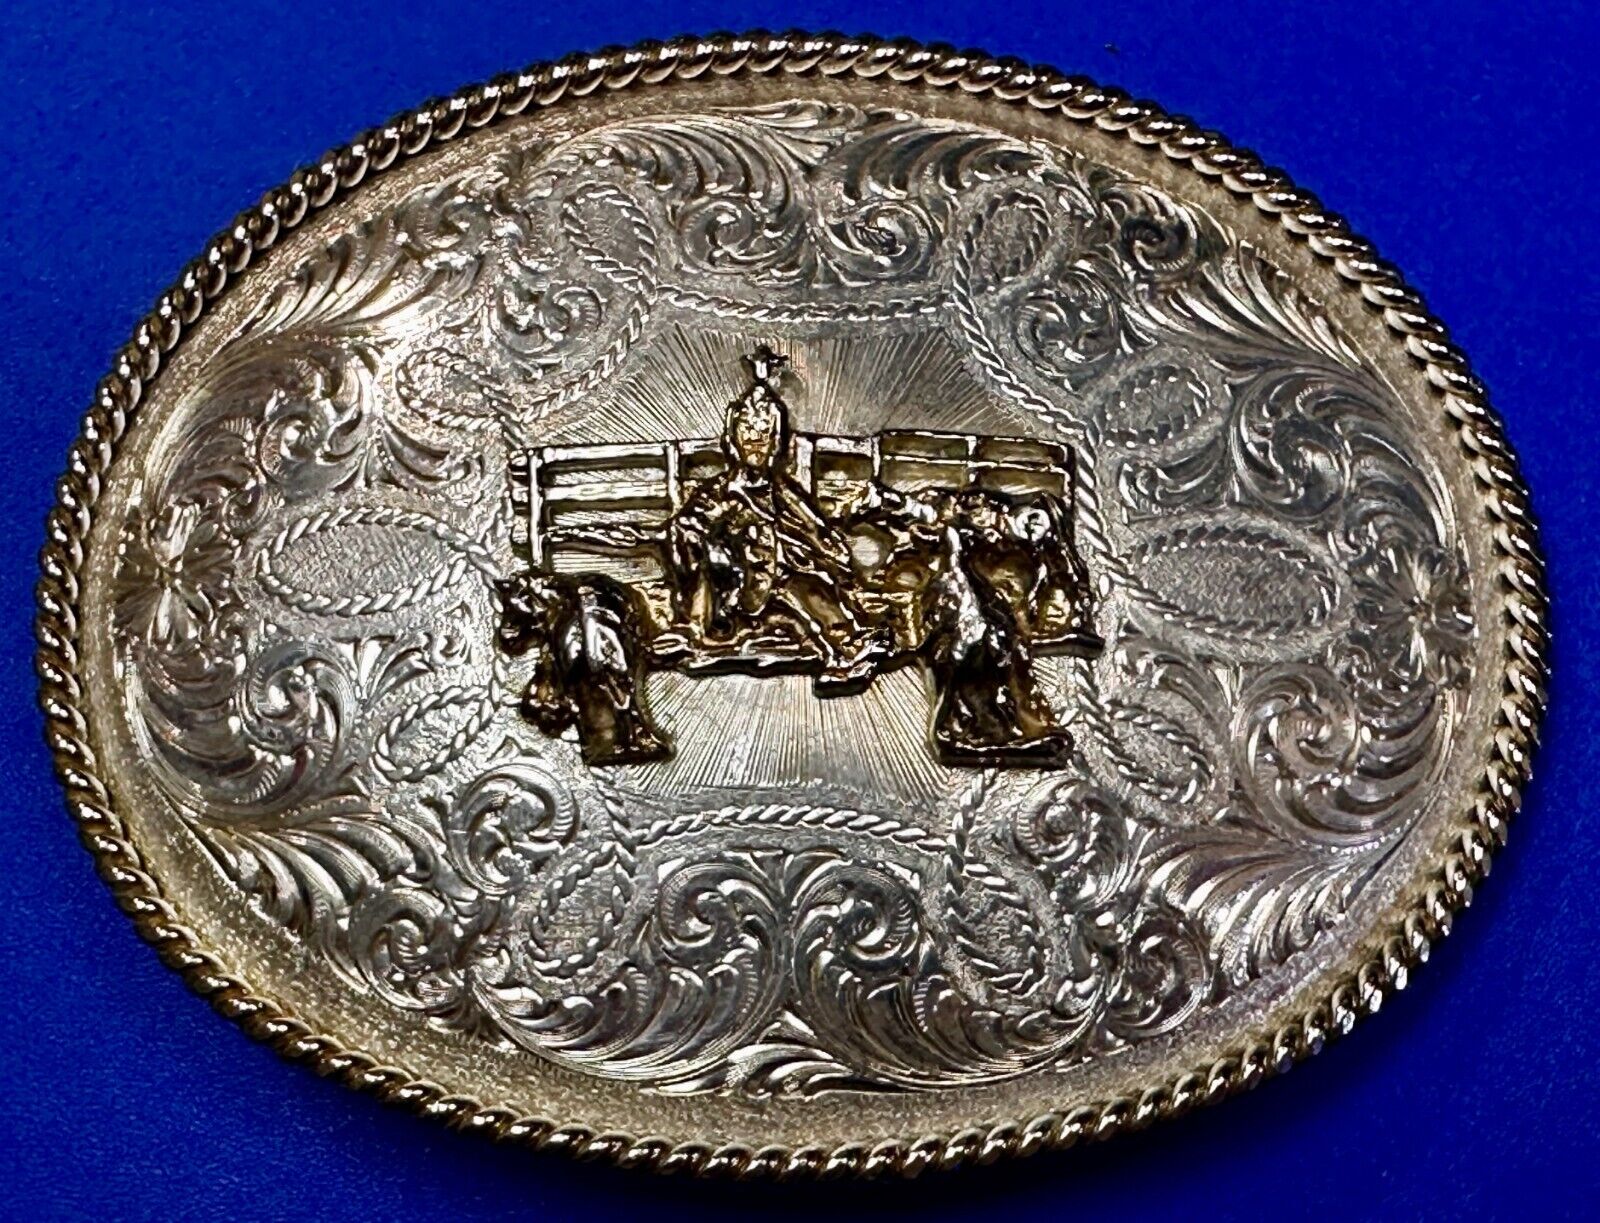 Roping Cowboy On Farm Vintage Montana Silversmiths Silver Plated Belt Buckle